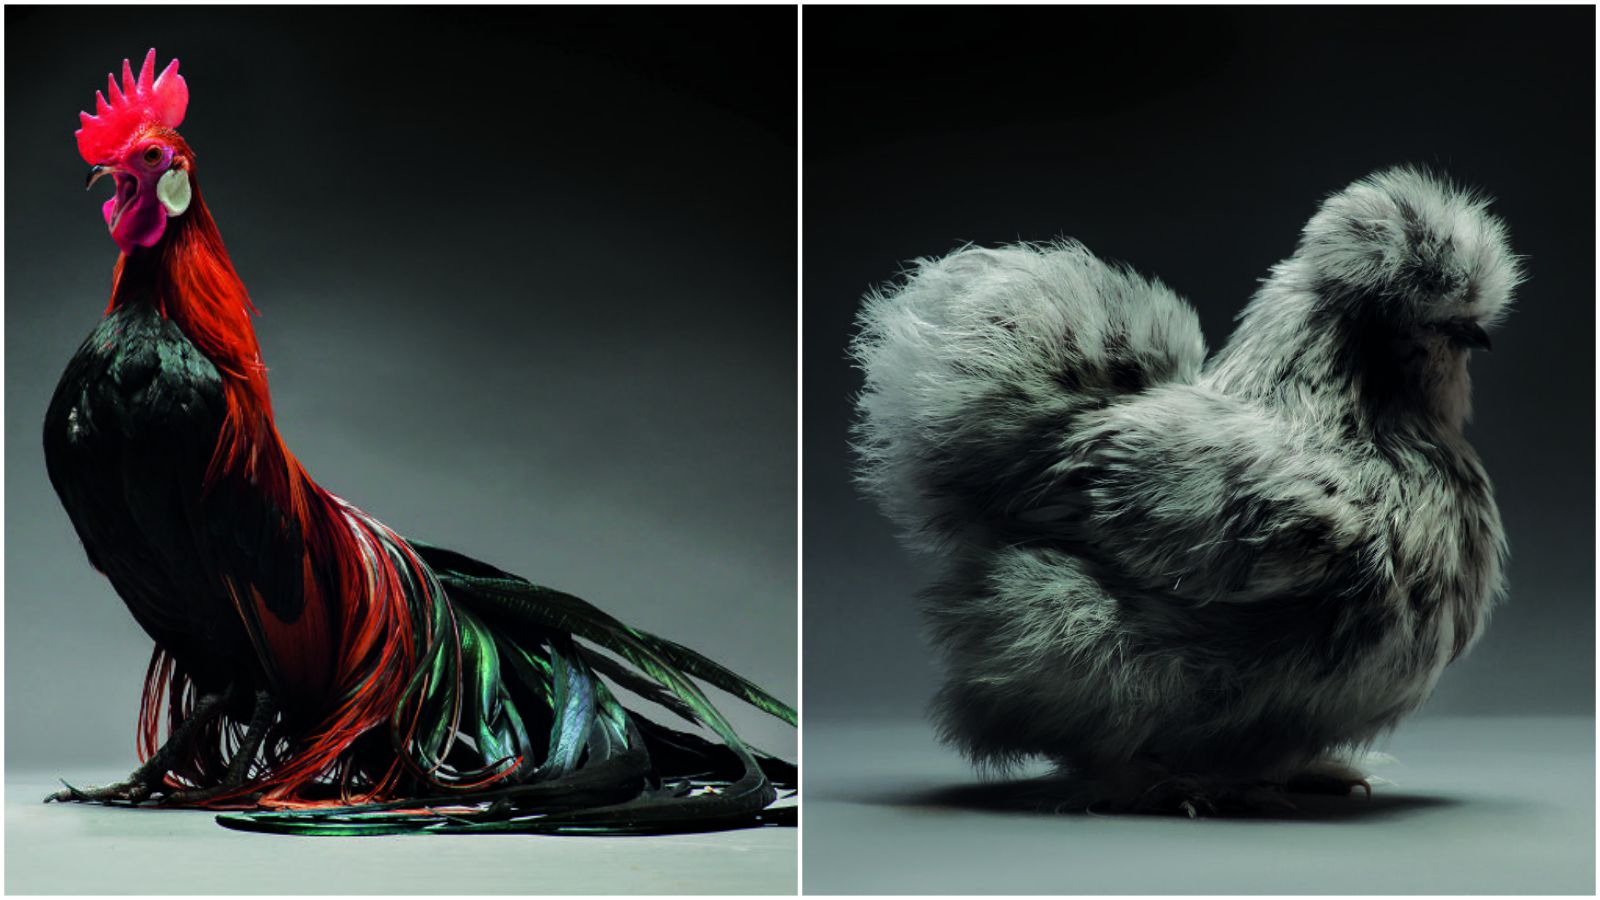 Two Amazing Photographers Take Pictures of Chickens and Showcase Their Underrated Beauty